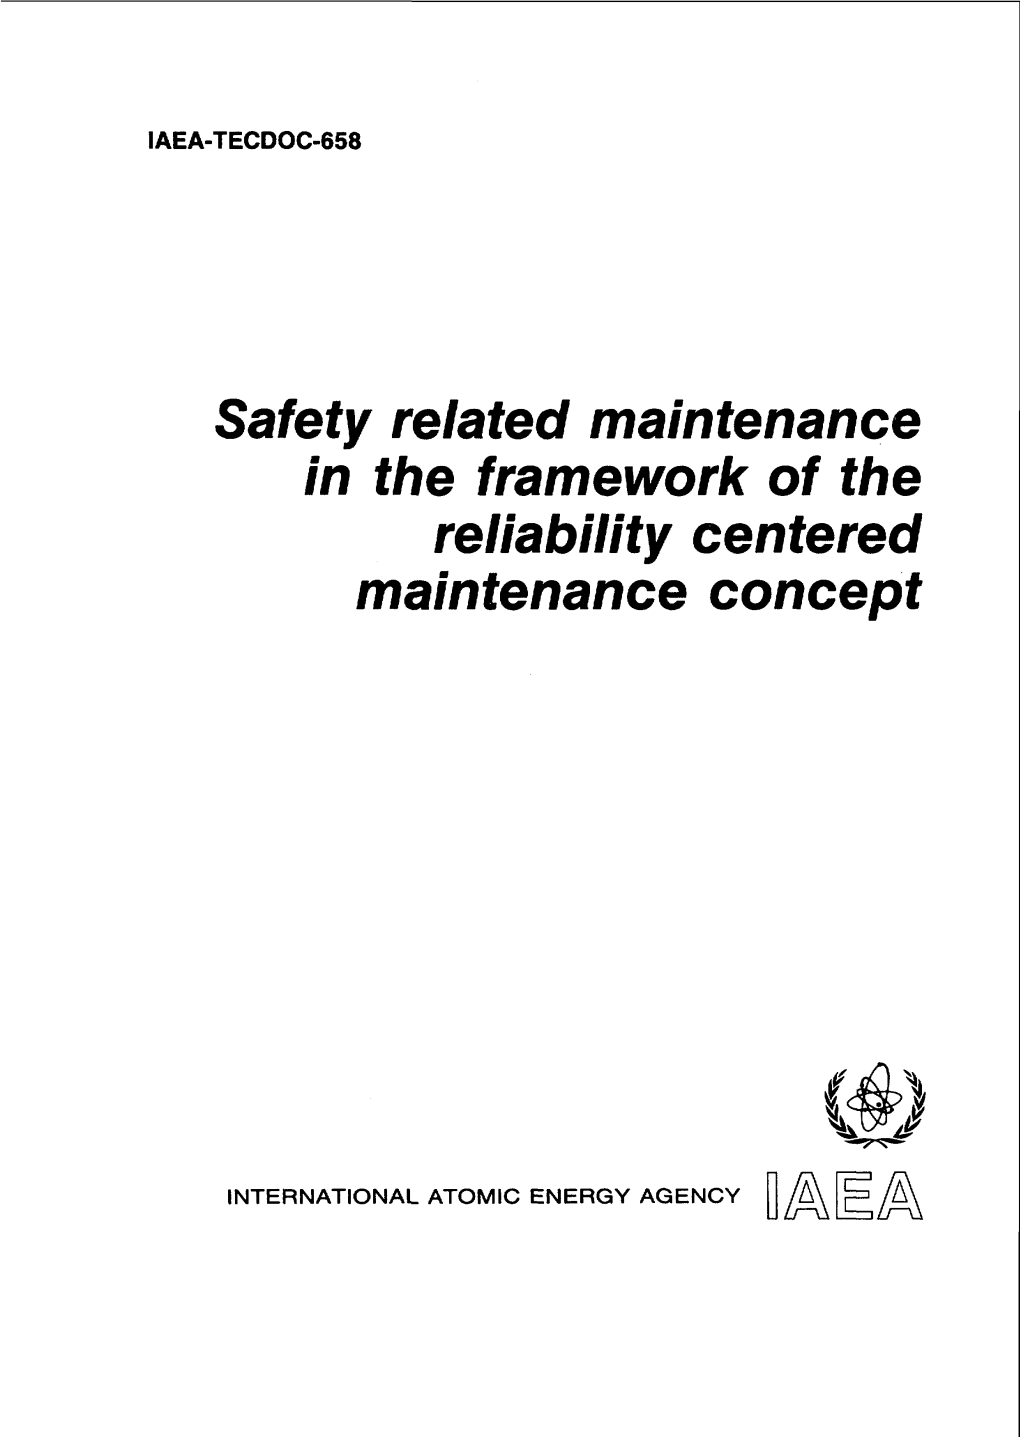 Safety Related Maintenance in the Framework of the Reliability Centered Maintenance Concept